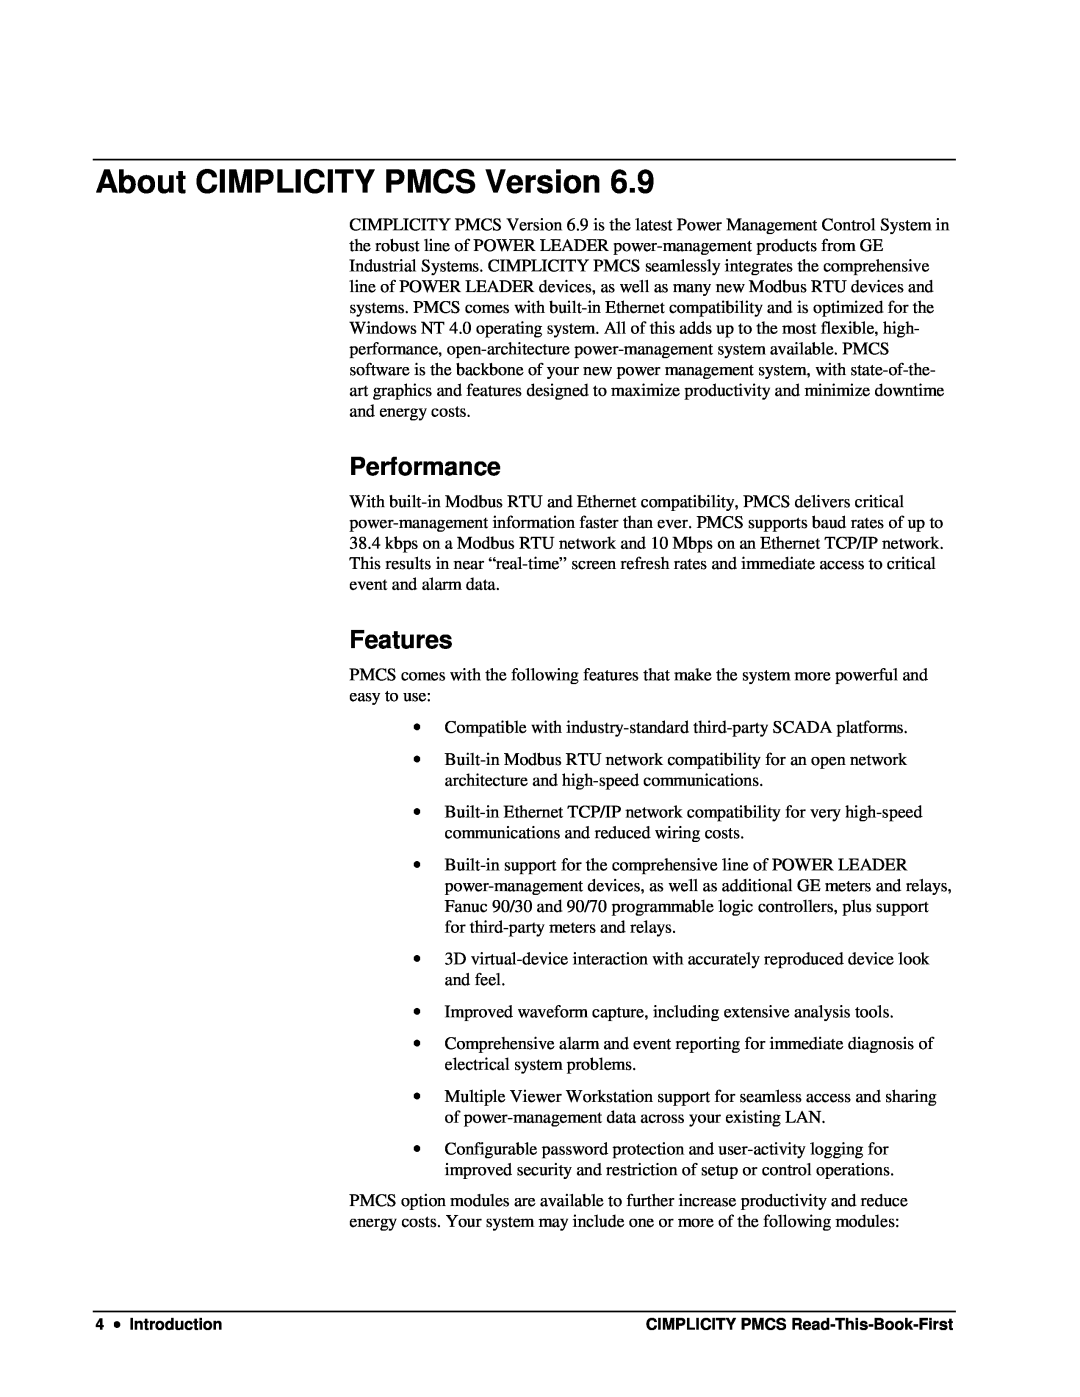 GE DEH-211 manual About CIMPLICITY PMCS Version, Performance, Features 